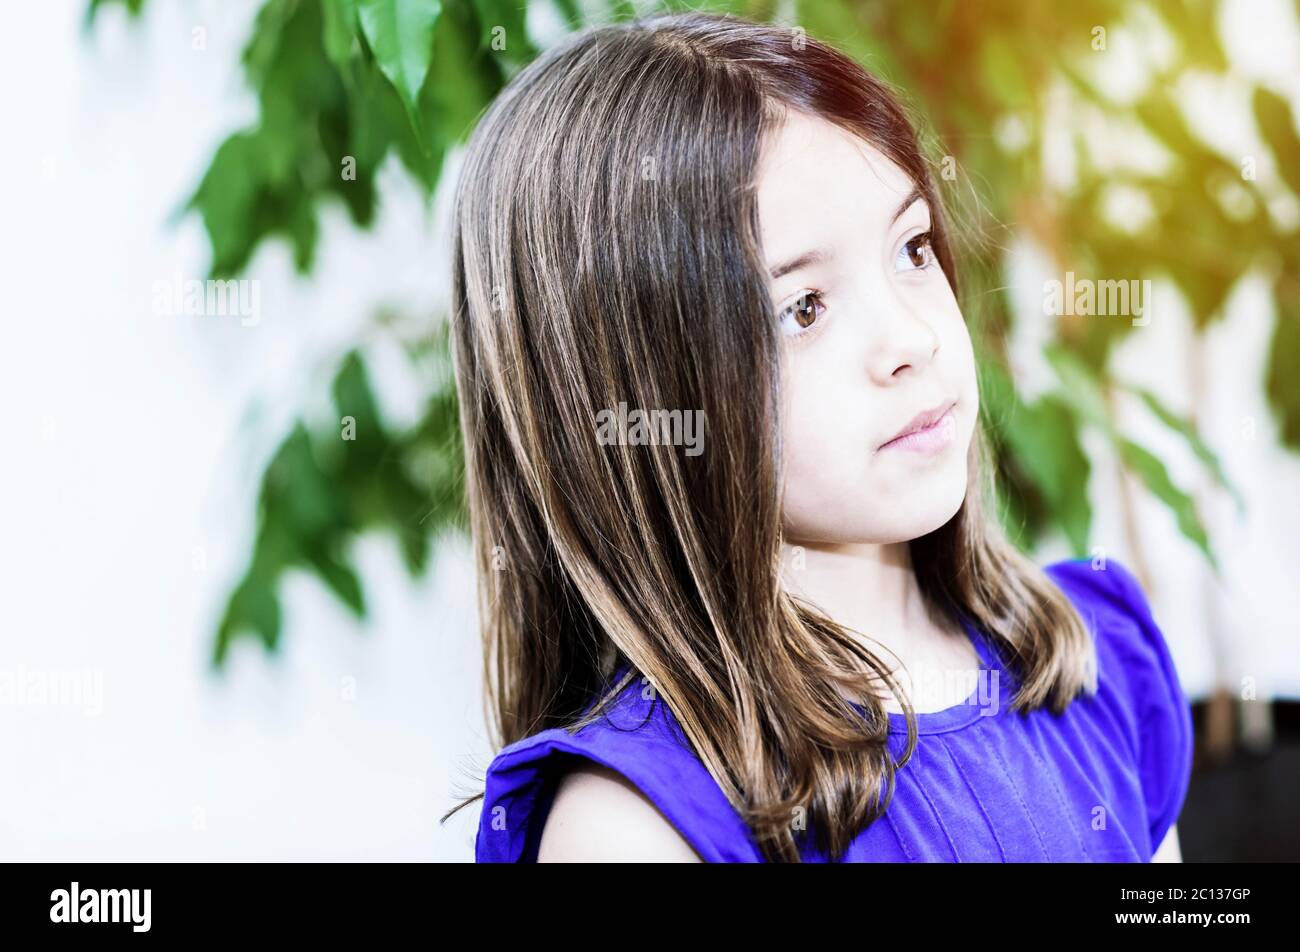 Portrait of cute girl concentrated Stock Photo